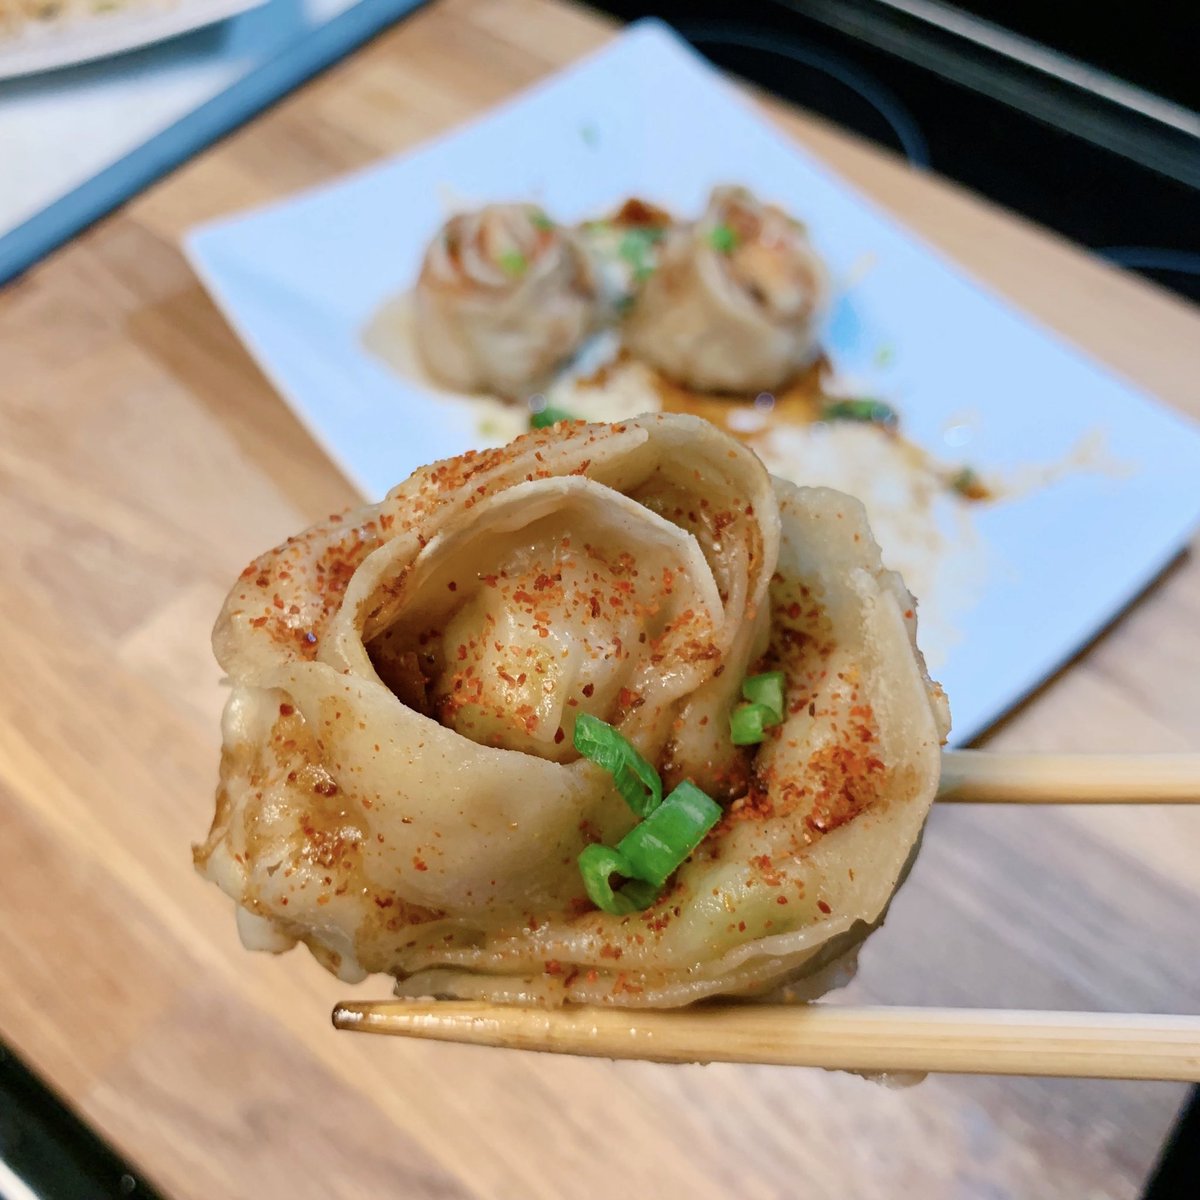 Shrimp and ground pork dumplings. These videos tire me but I love watching them afterwards.